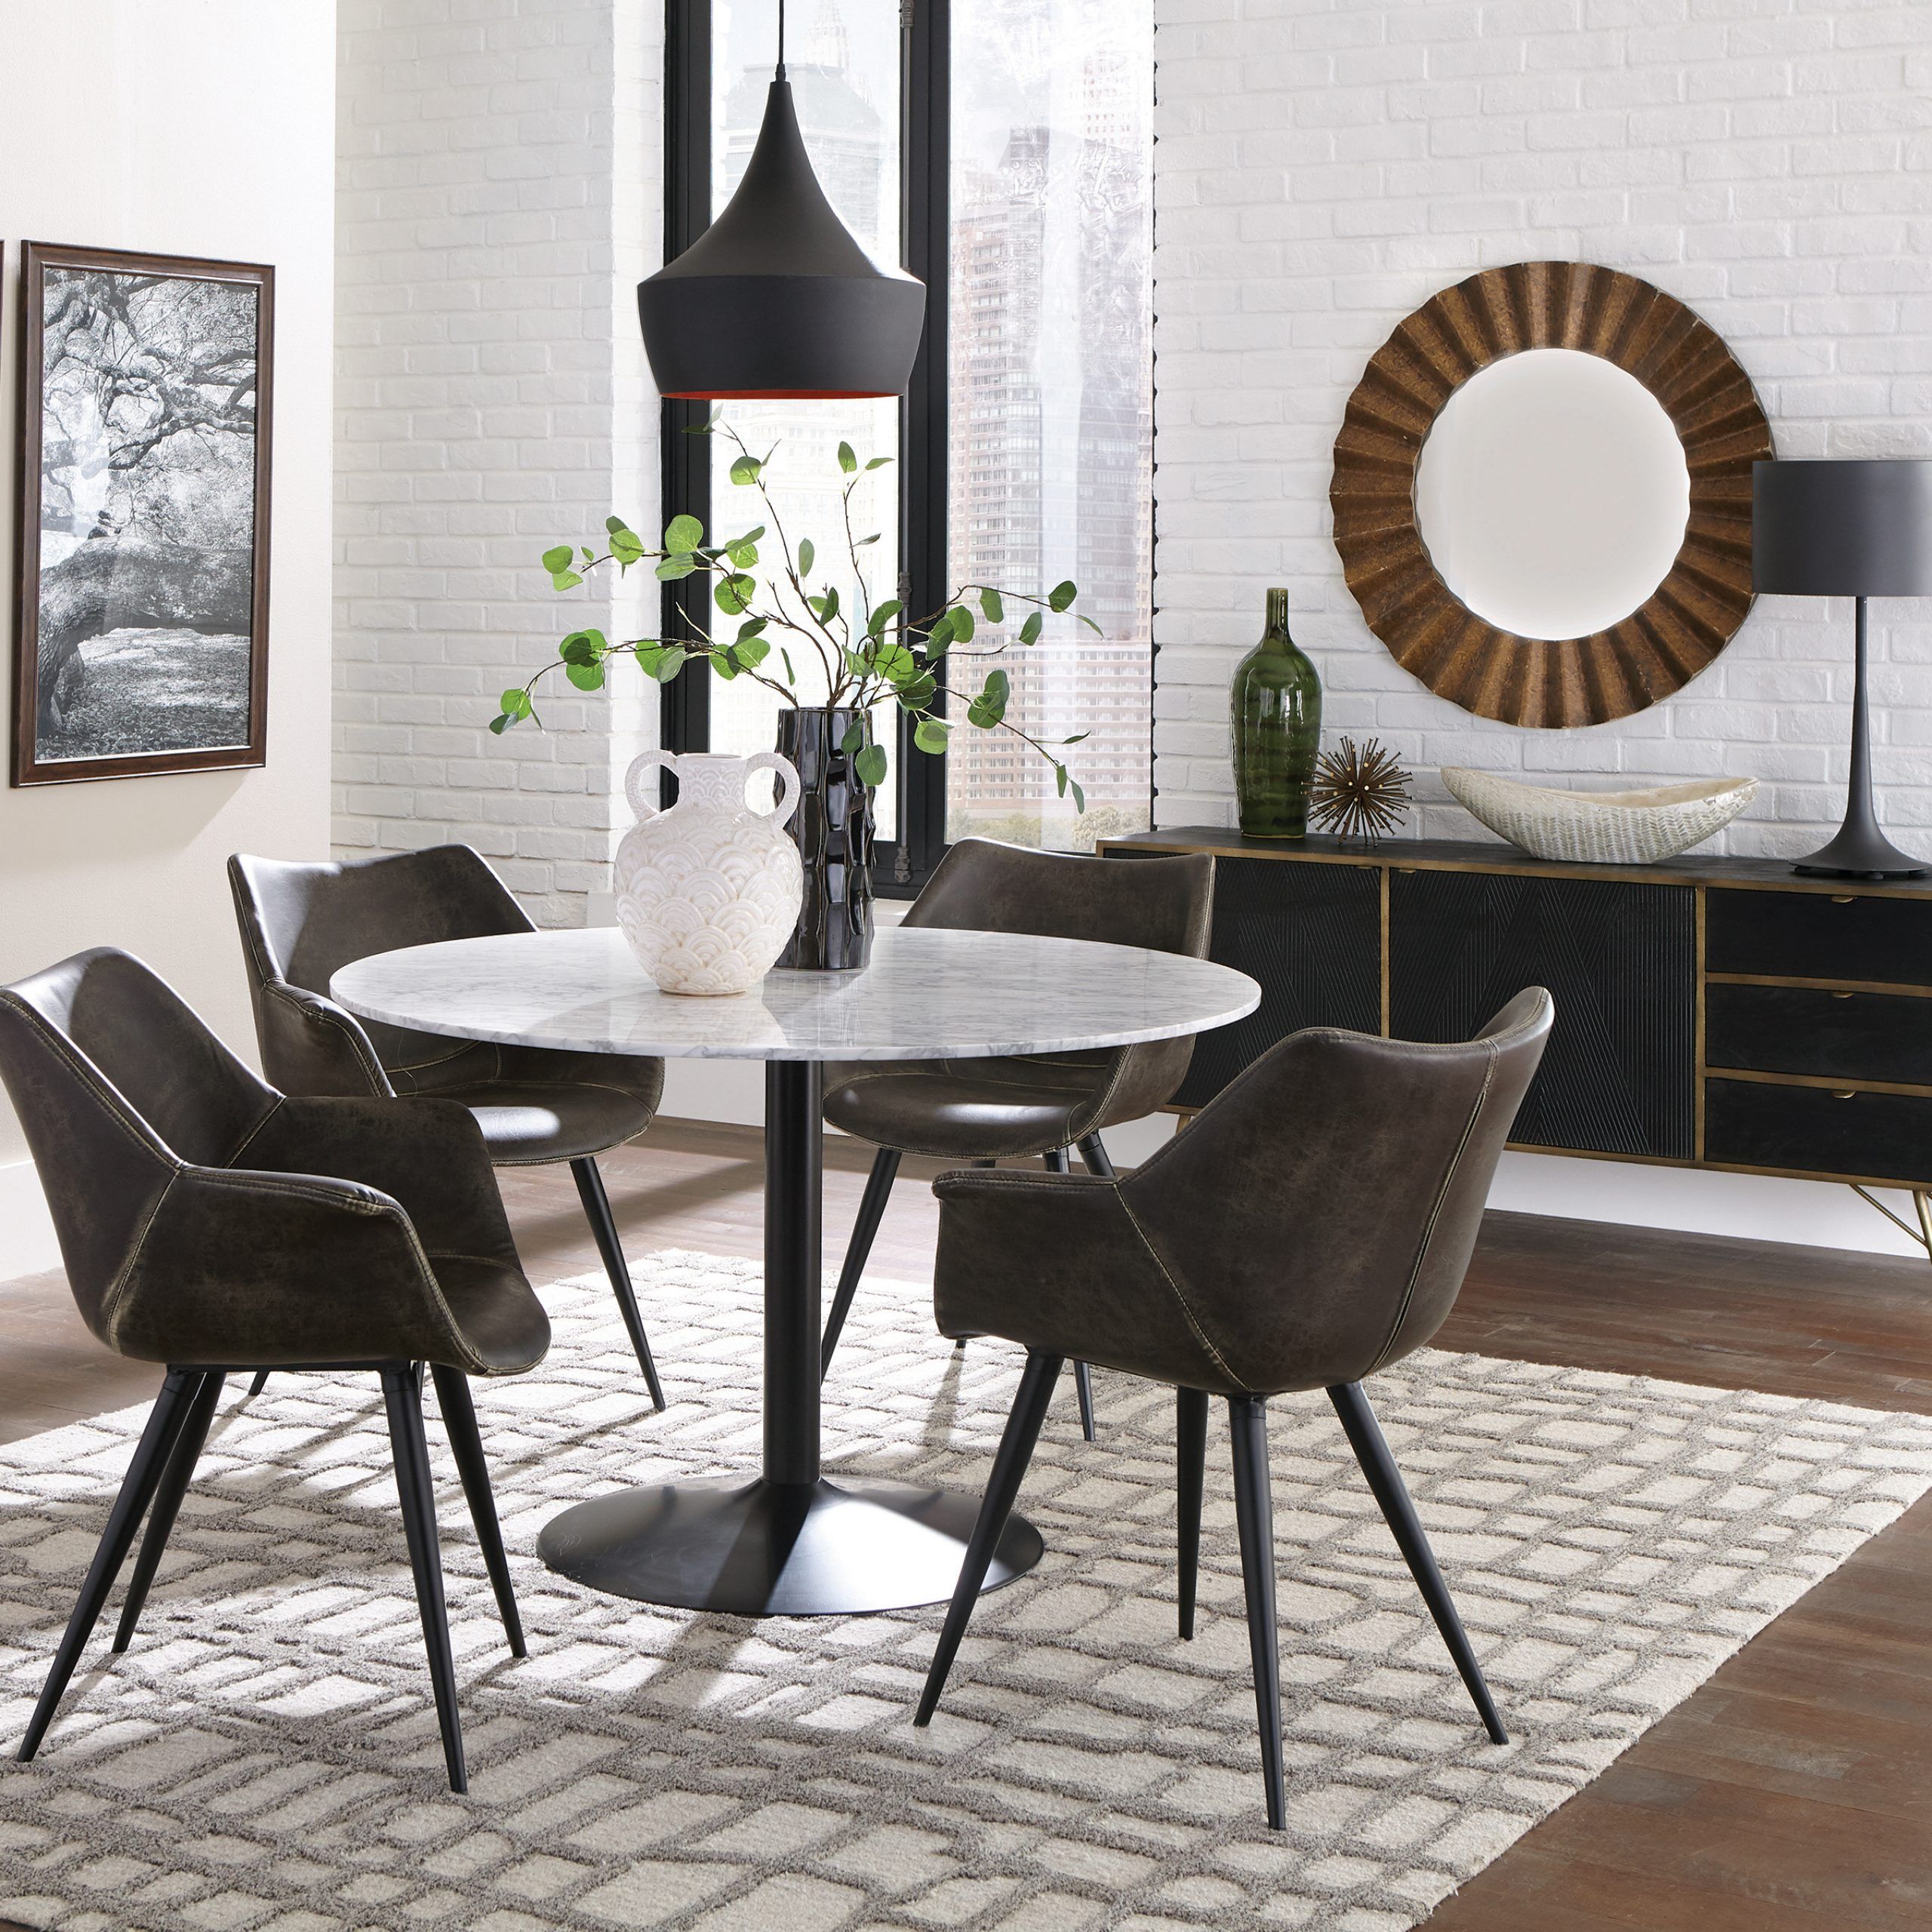 5 Piece Round Dining Sets With Recent Bartole 5 Piece Round Dining Set White And Antique Bomber – Coaster (View 7 of 15)